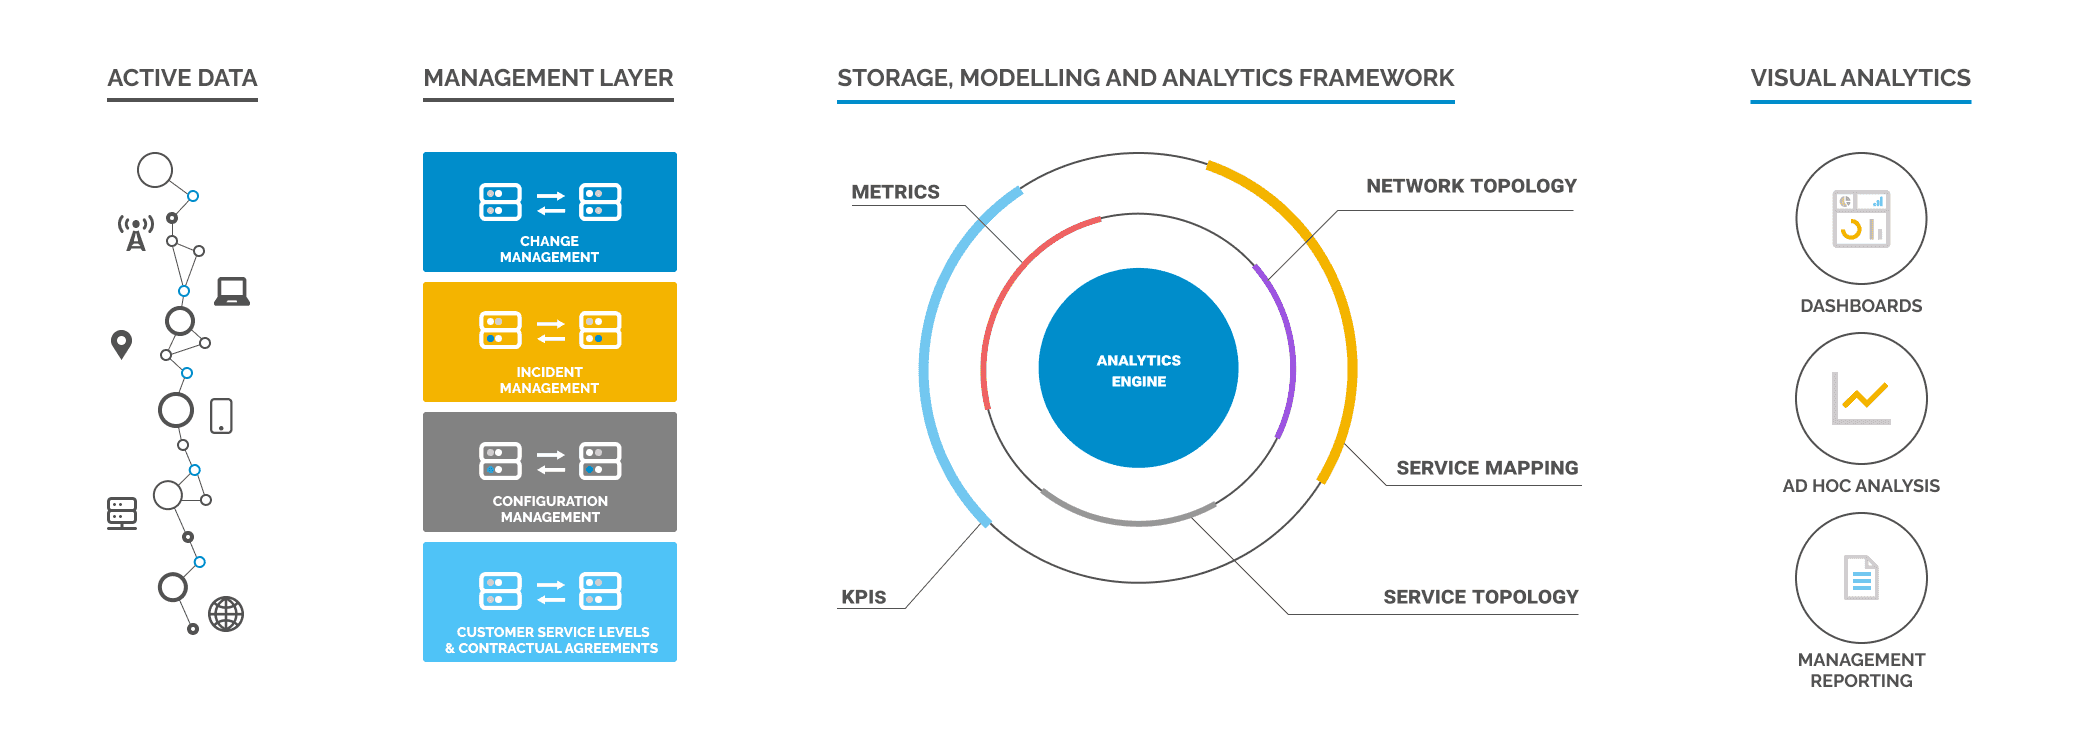 Visimetrix collects data from across the network, which is enriched with other data sources to provide additional context and intelligence. This information is qualified, processed and analysed by our analytics framework and displayed in intuitive dashboards that let you monitor and report upon your network performance.